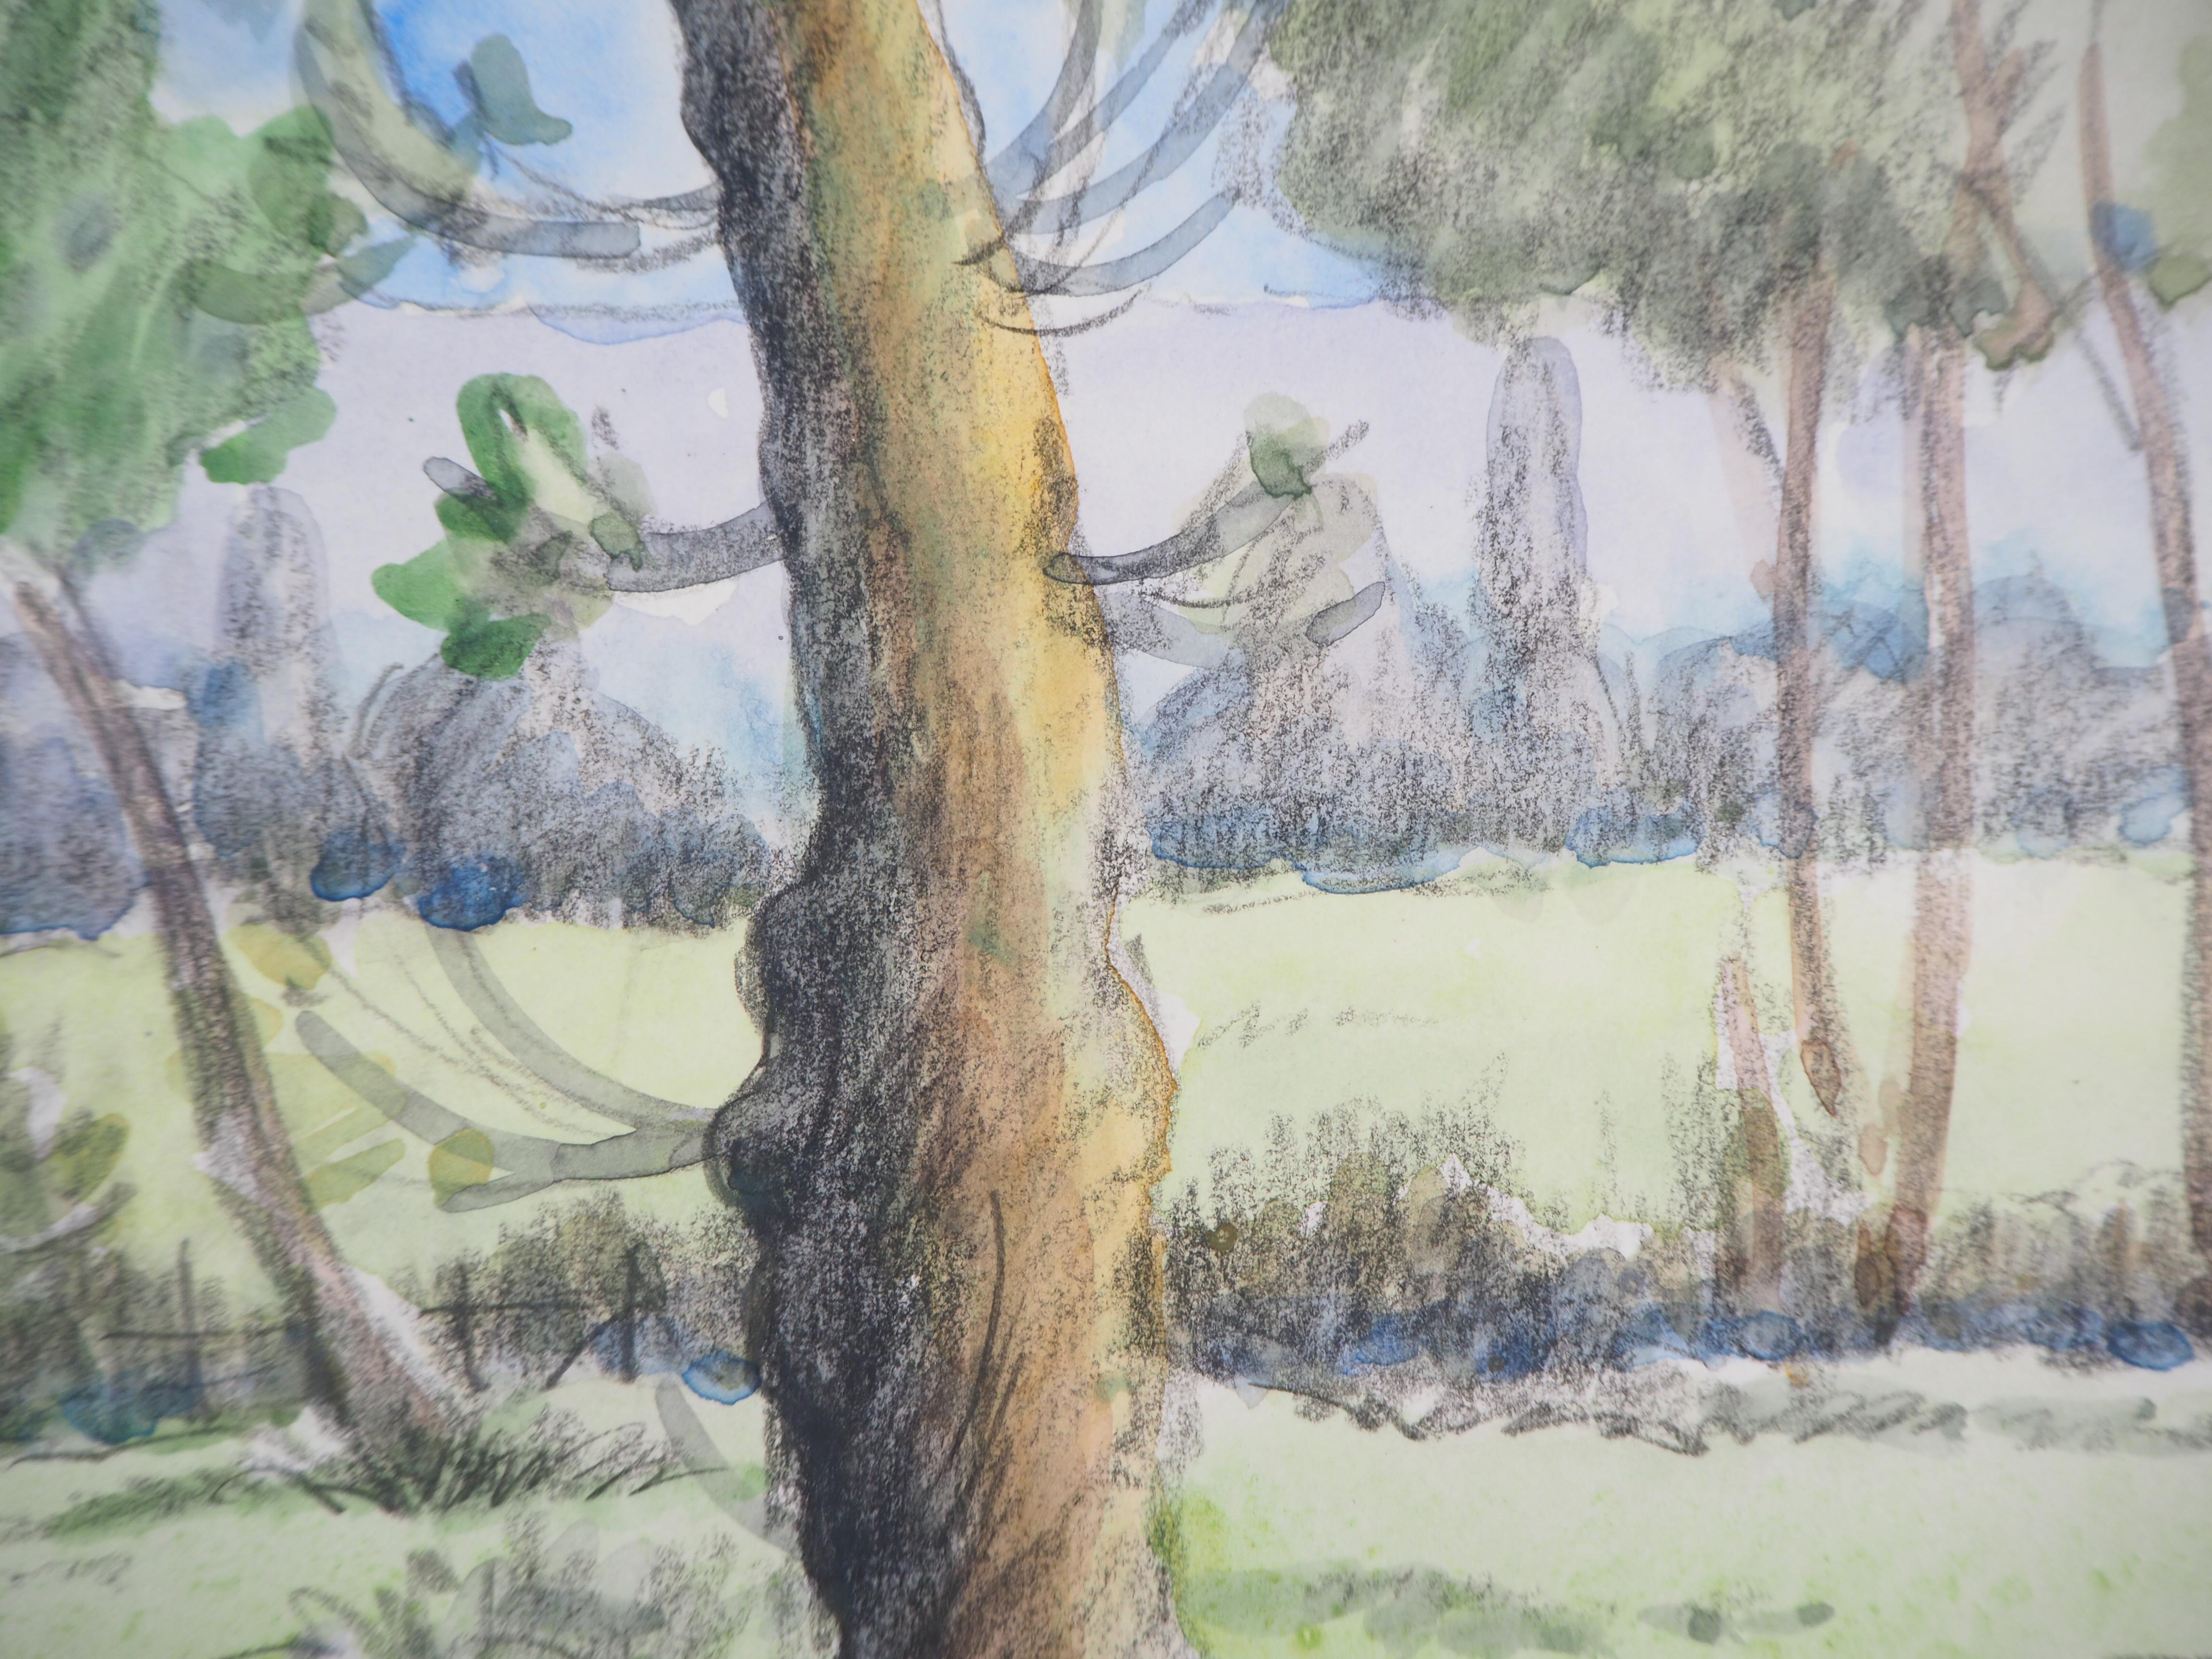 Paul Emile PISSARRO (1884-1972)
Tribute to Cezanne : The Old Pines, c. 1940

Original watercolor and charcoals painting
Handsigned in the lower left corner
On vellum 25 x 32 cm (c. 10 x 13 in)

Very good condition